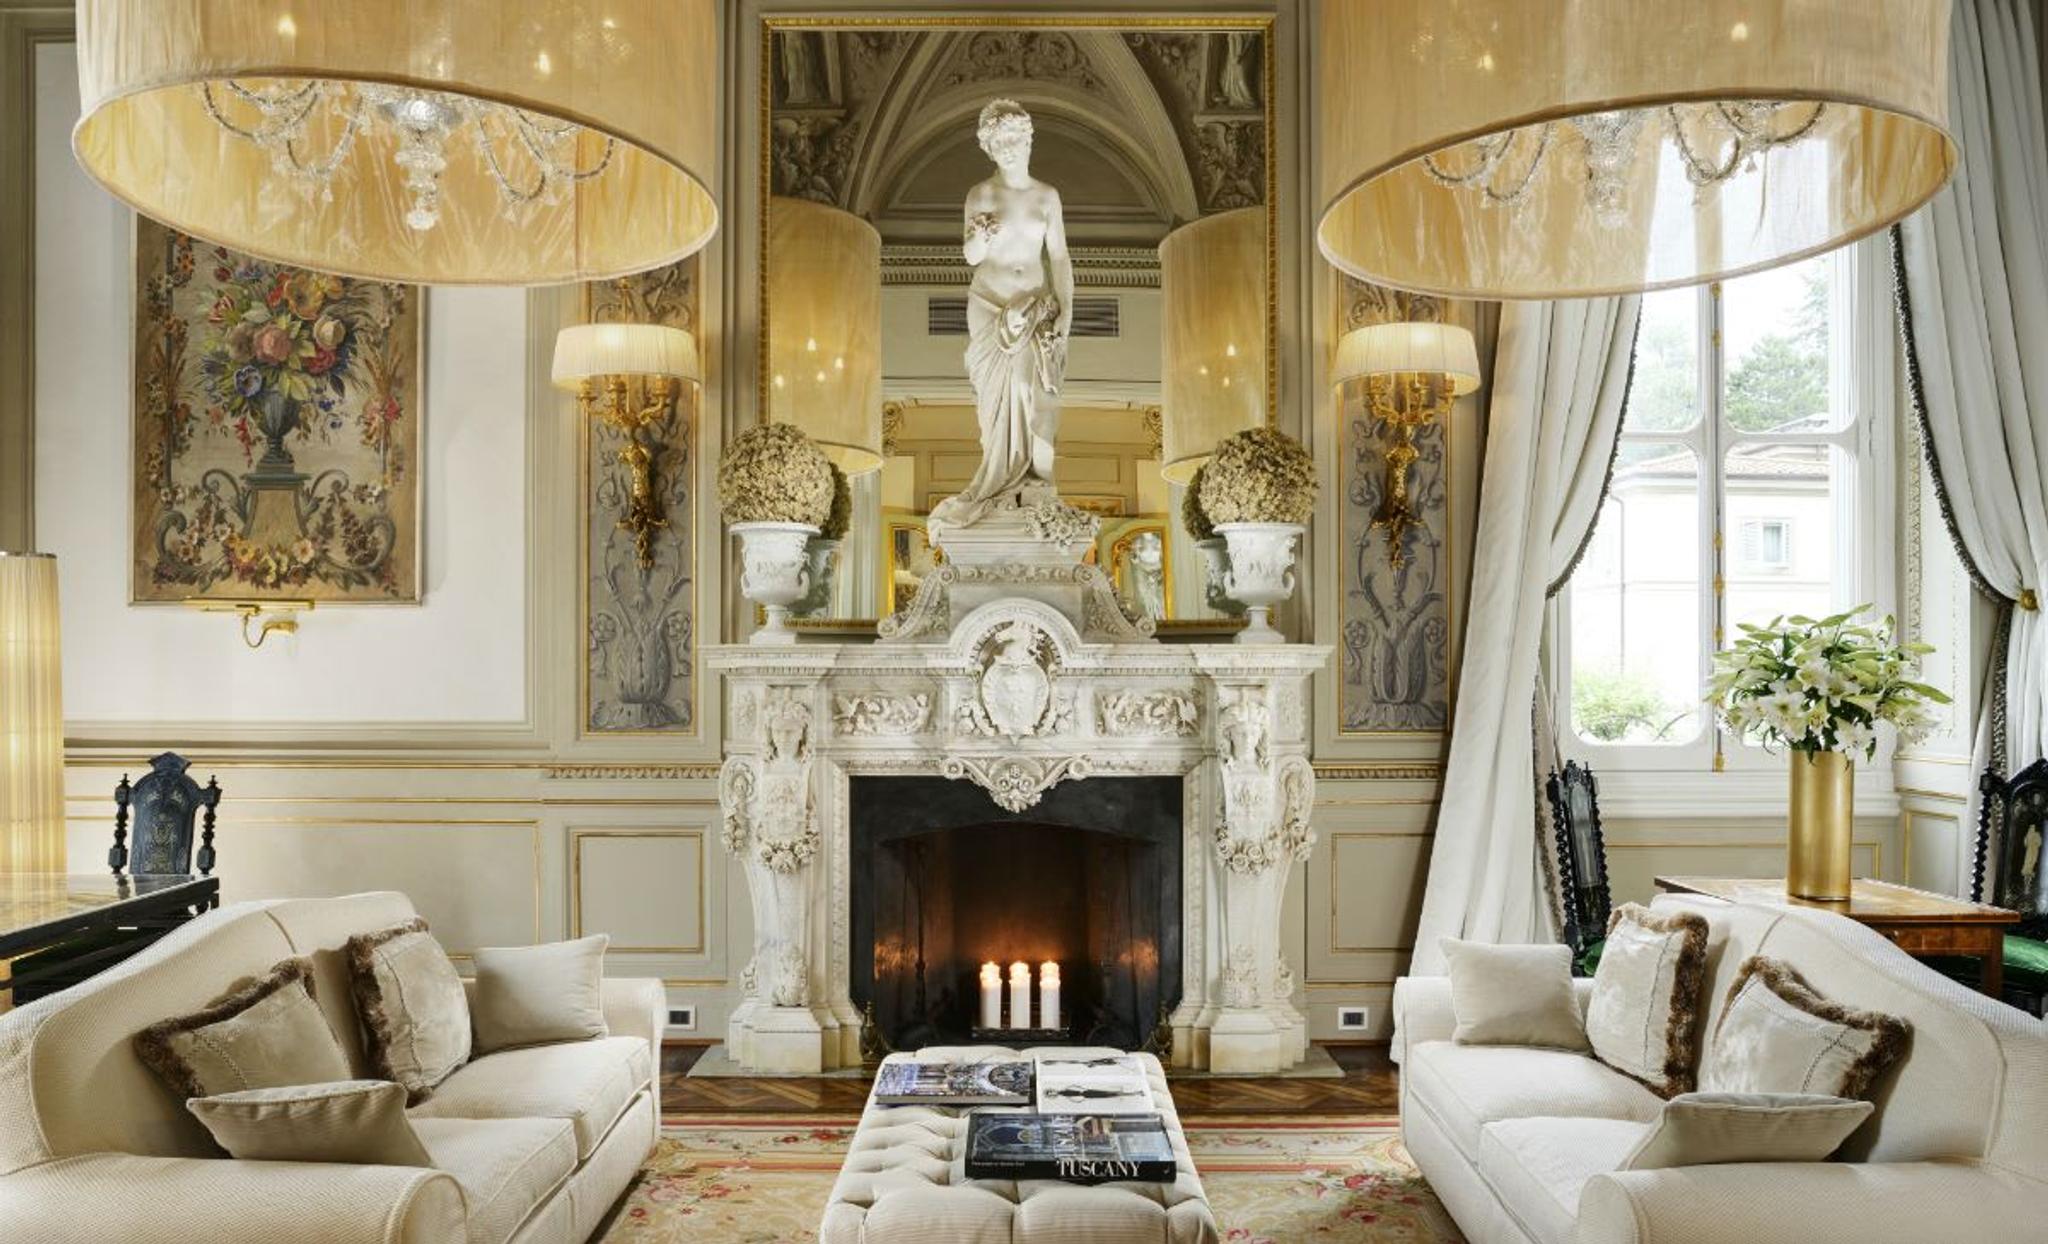 The striking neoclassical interiors of one of the fabulous salons of the luxurious Villa Cora in Florence.